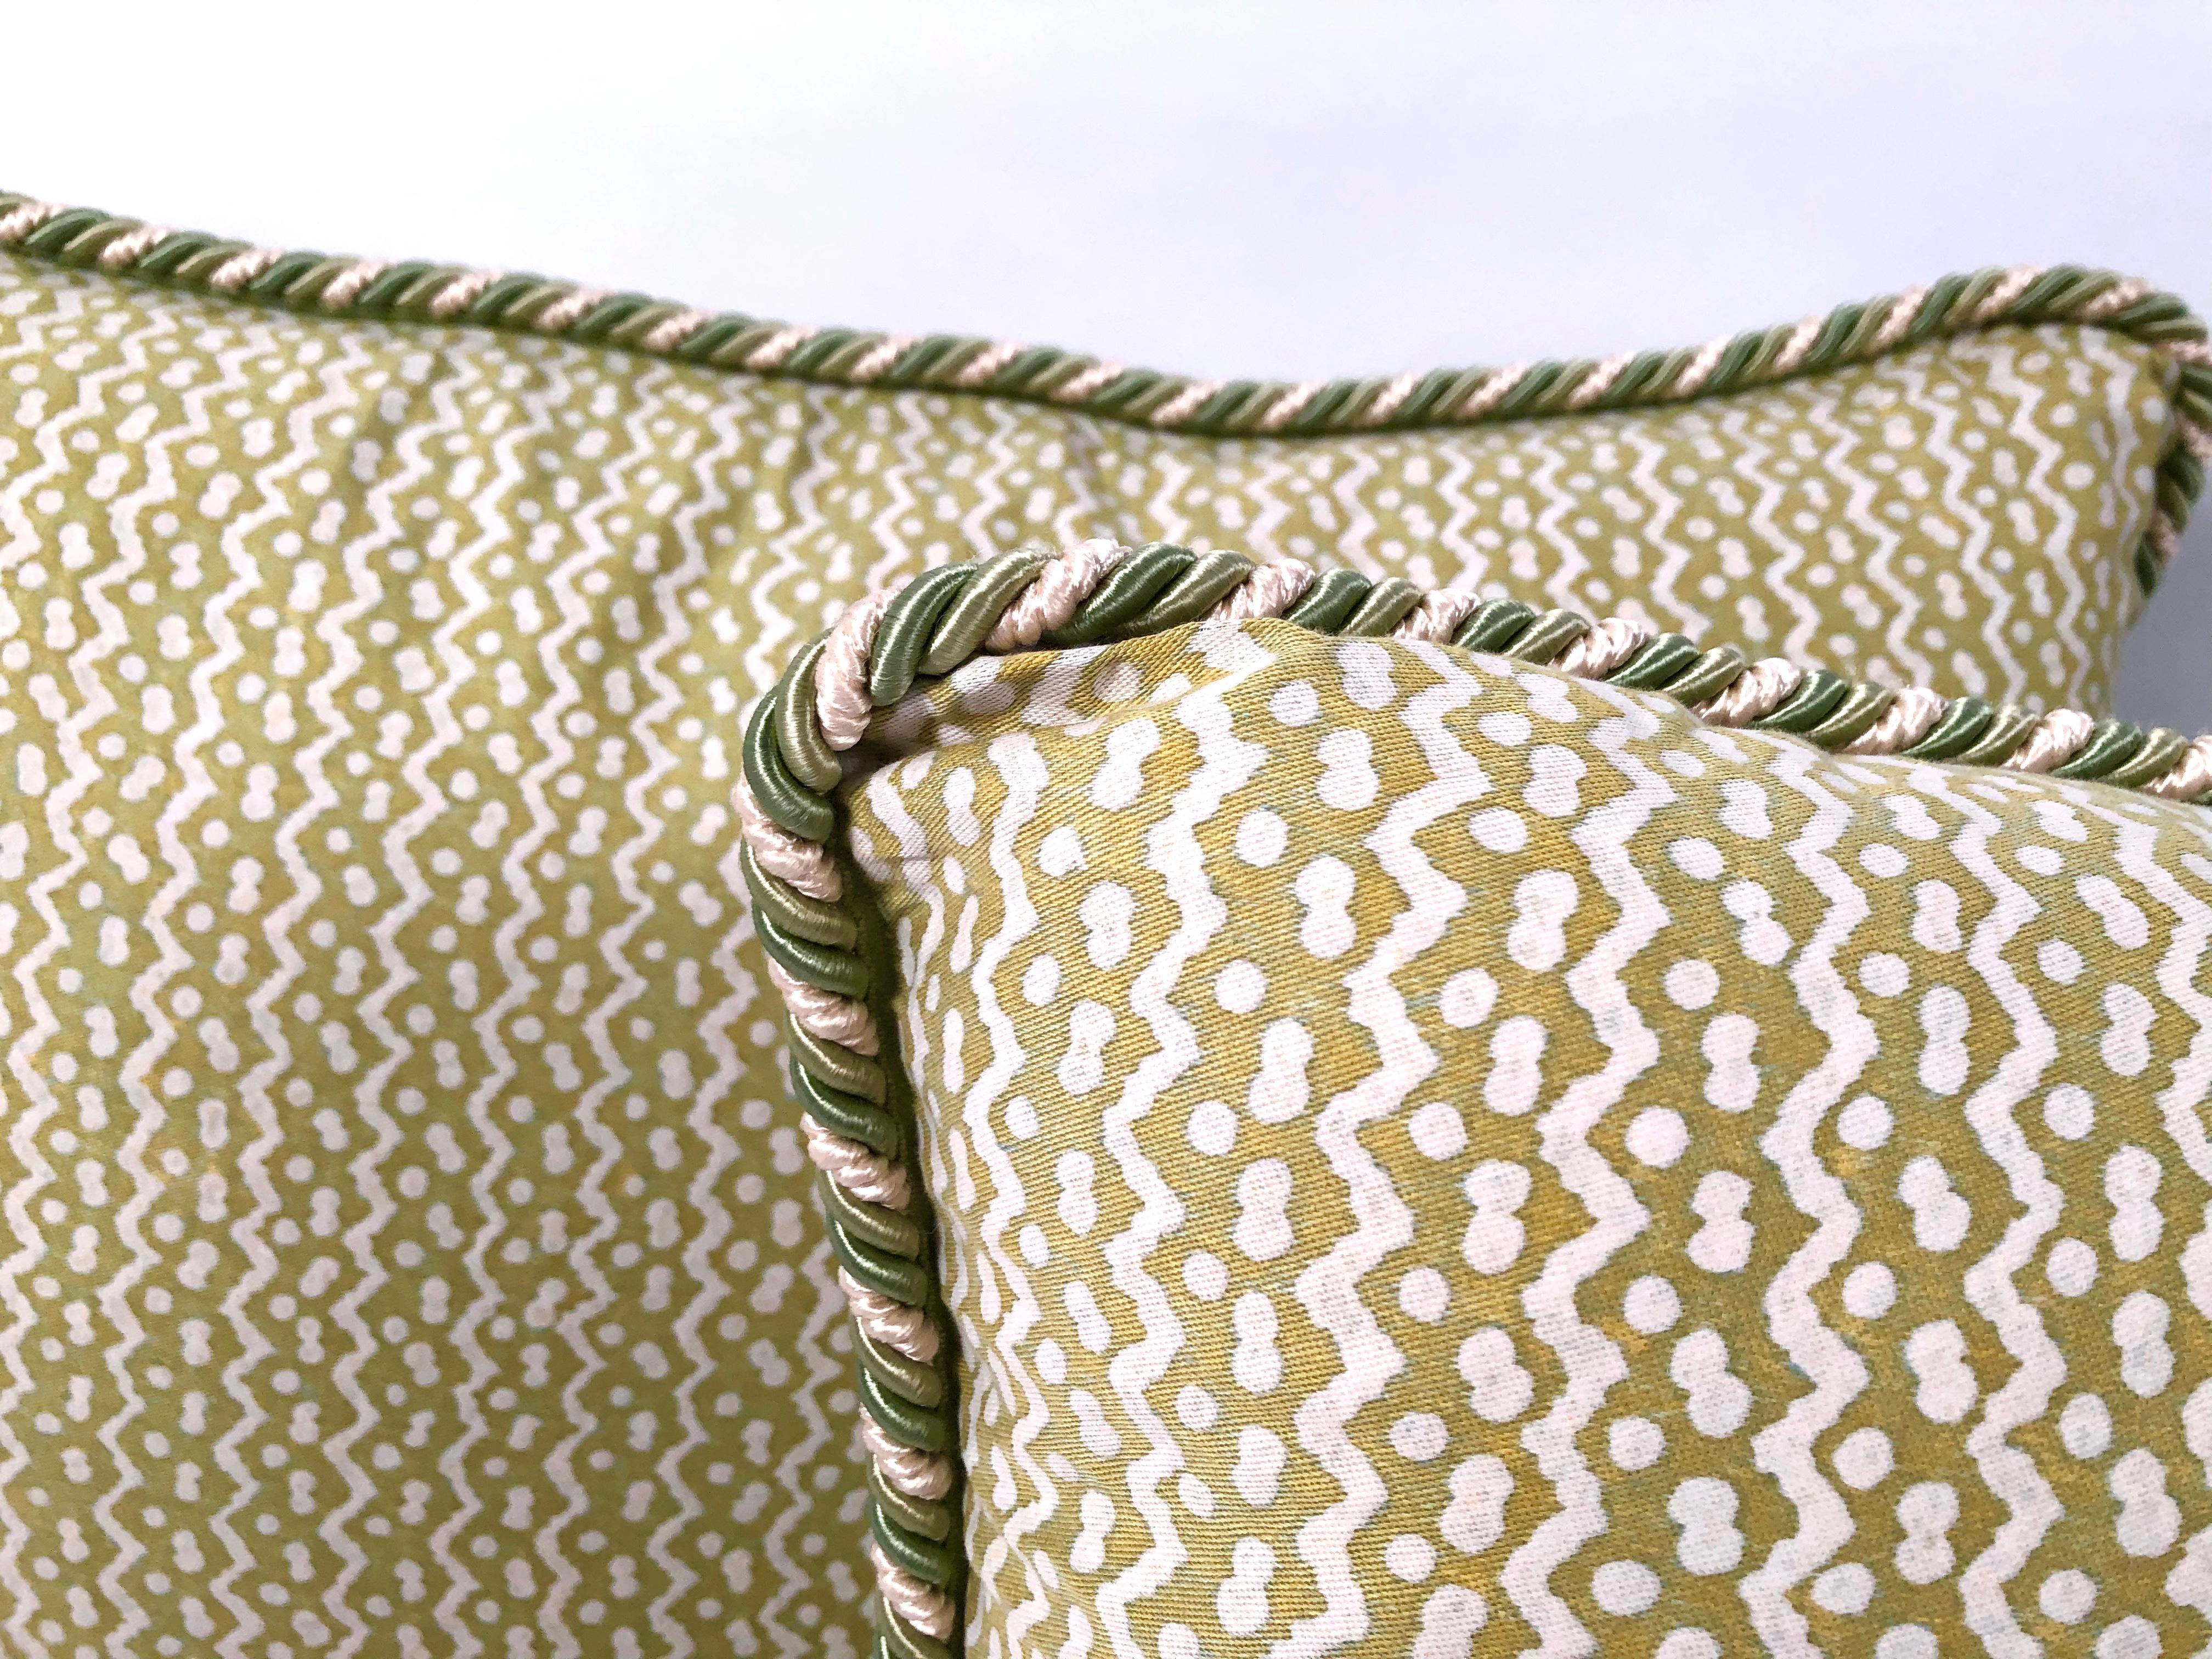 A pair of original Fortuny fabric Tapa pattern pillows in white on apple green, featuring zig zag lines and dots characteristic of Fortuny's distinctive hand made and proprietary technique, down filled and backed with high quality wool velvet with